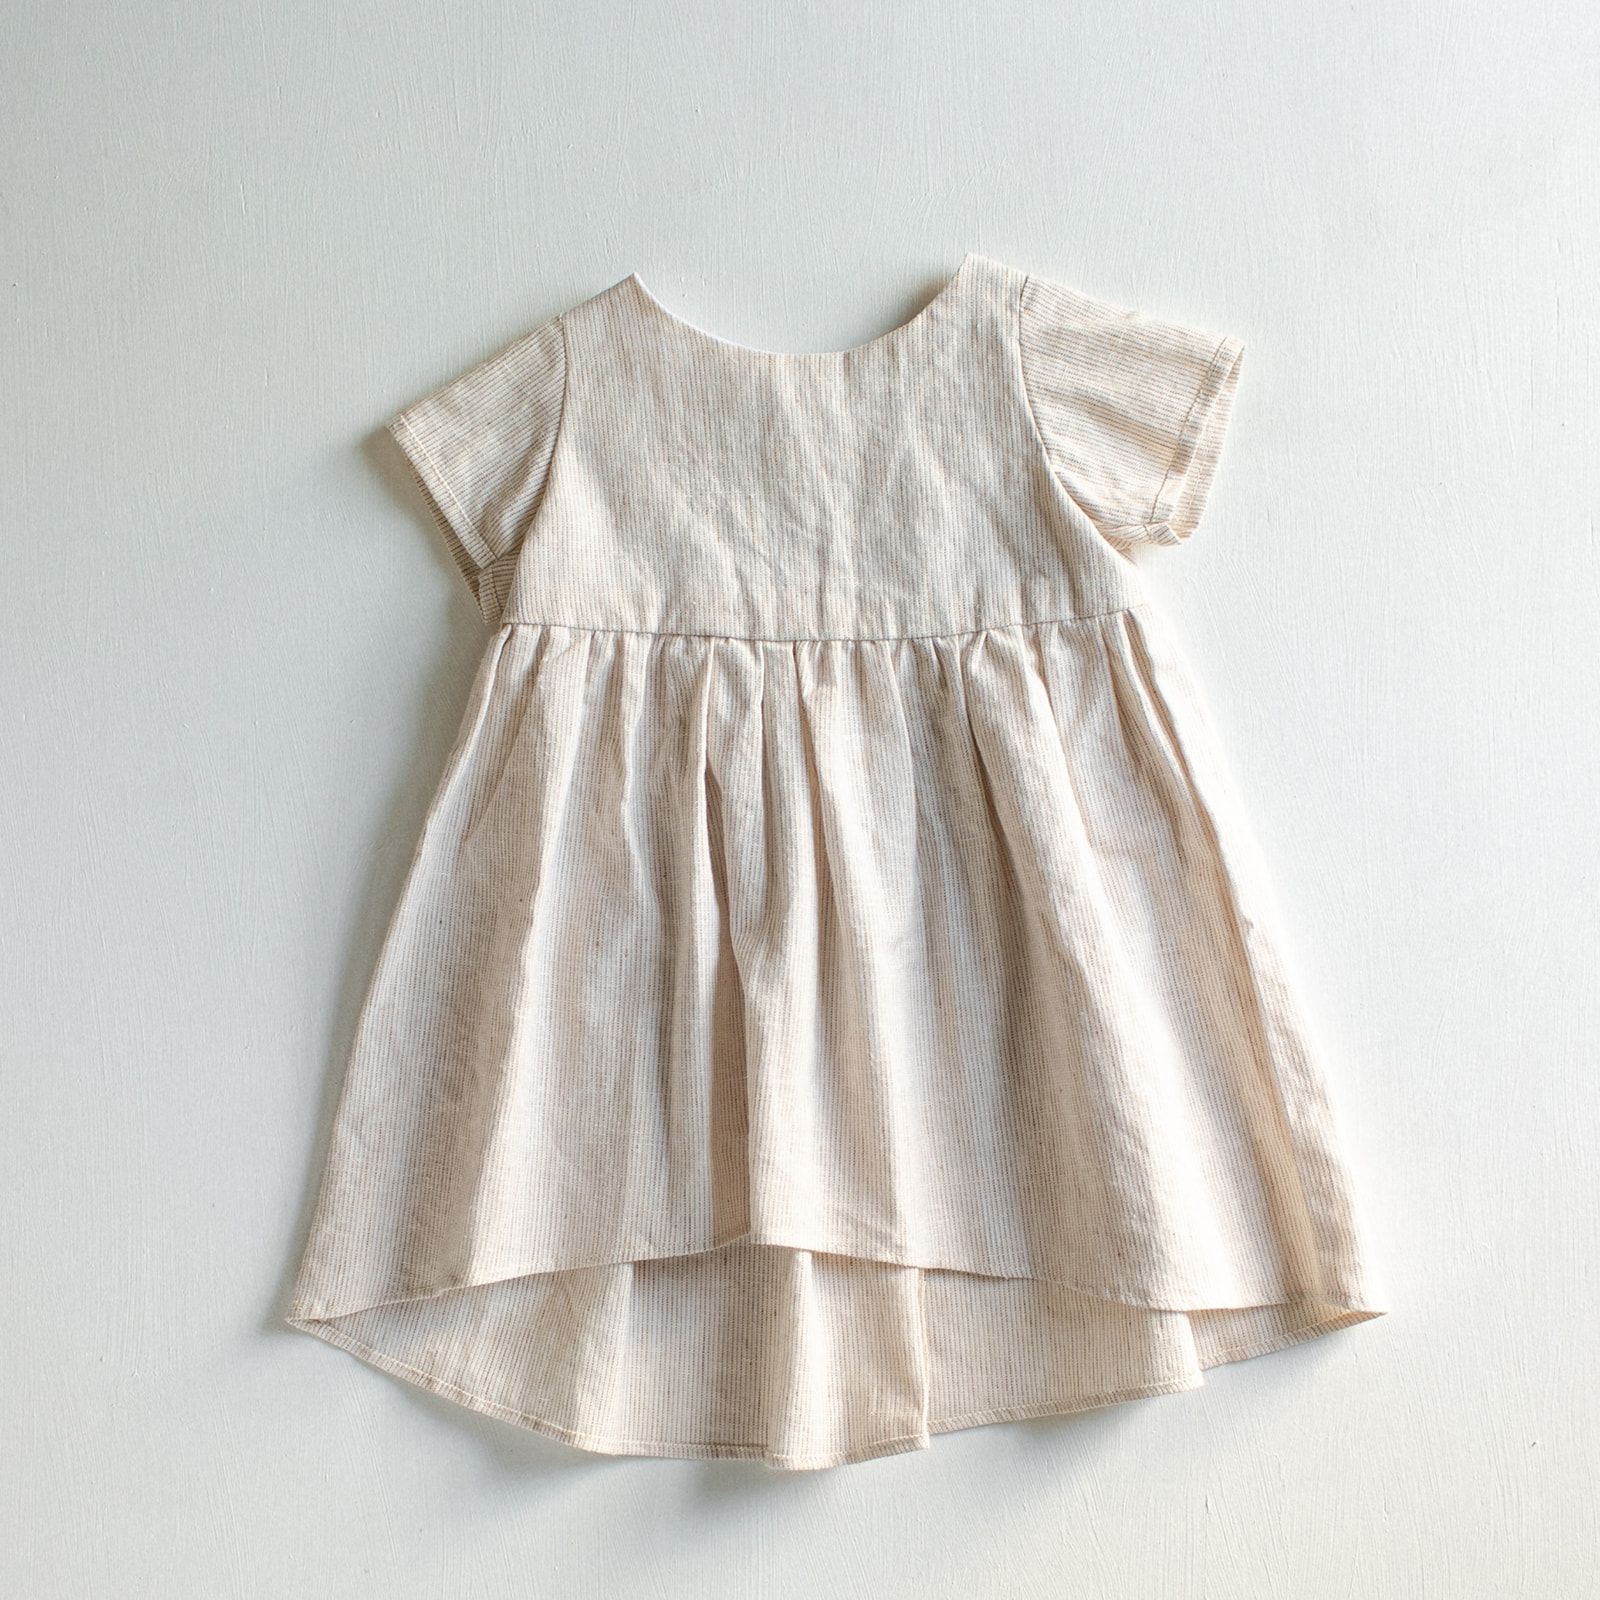 old-fashioned ivory striped linen dress